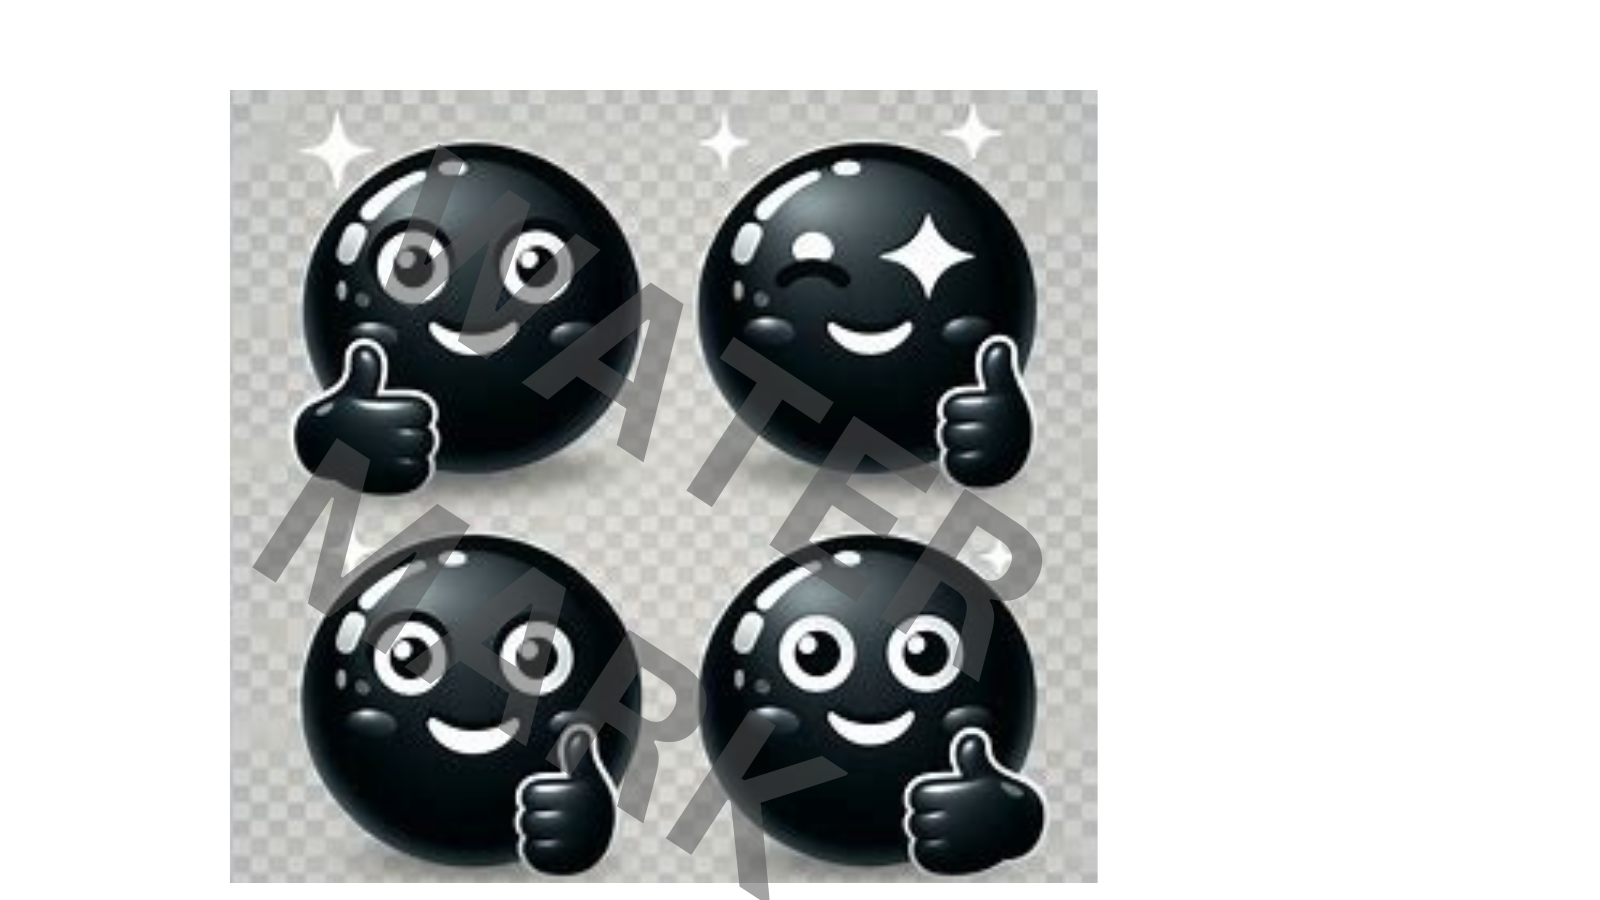 A collage of four black thumbs-up emojis with various facial expressions, including a wink and a grin.